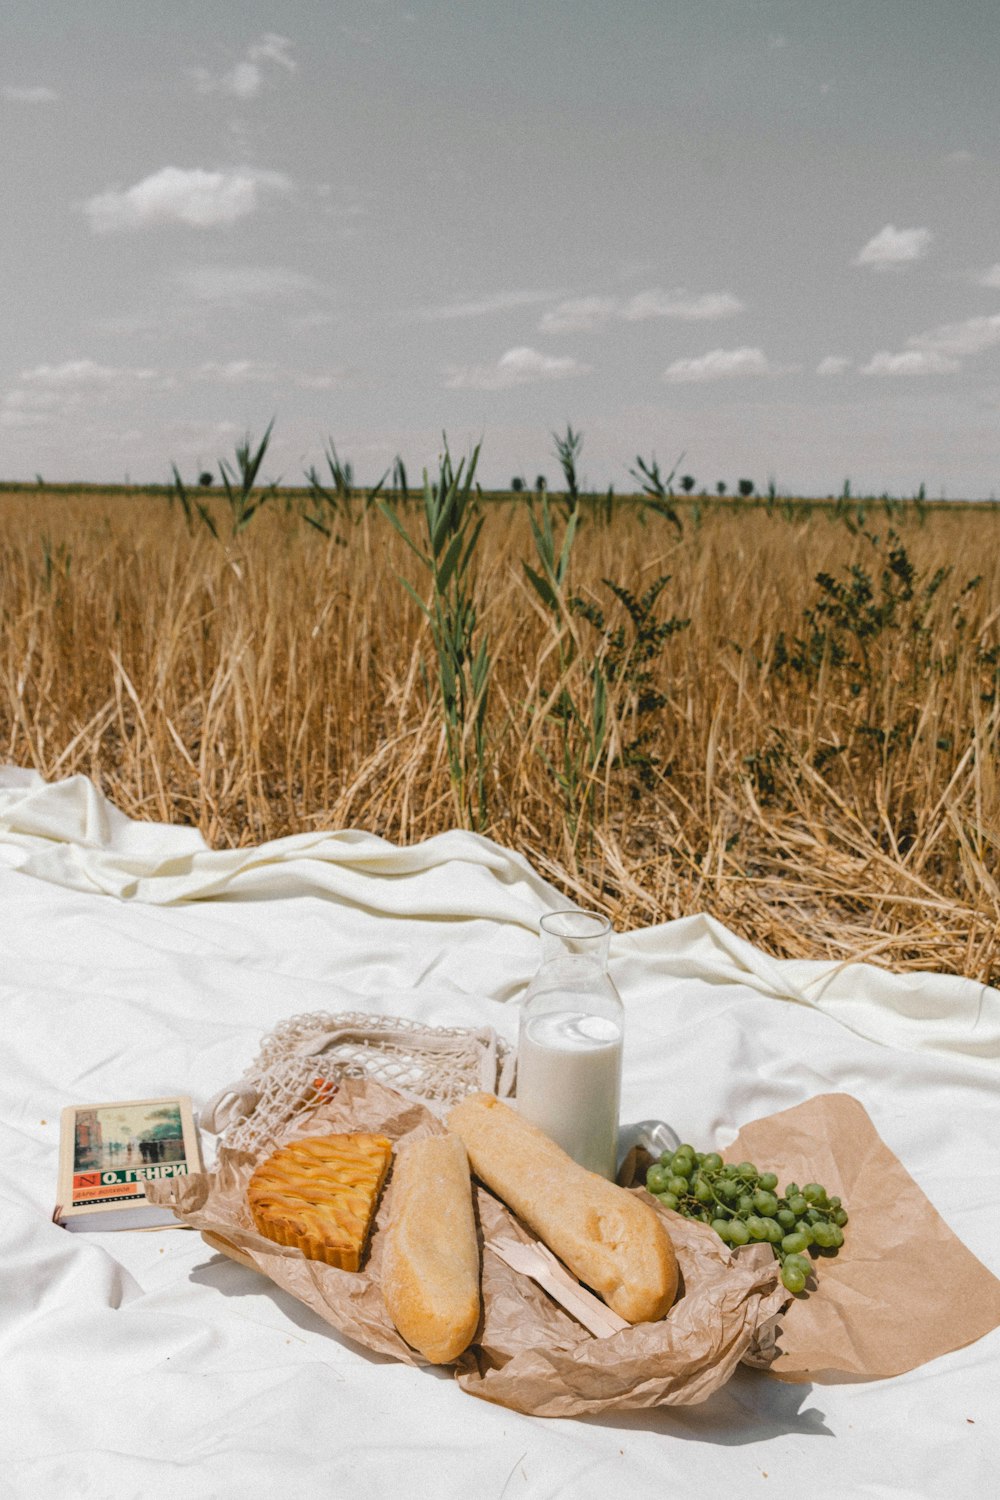 a bag of bread, grapes, and milk on a blanket in a field